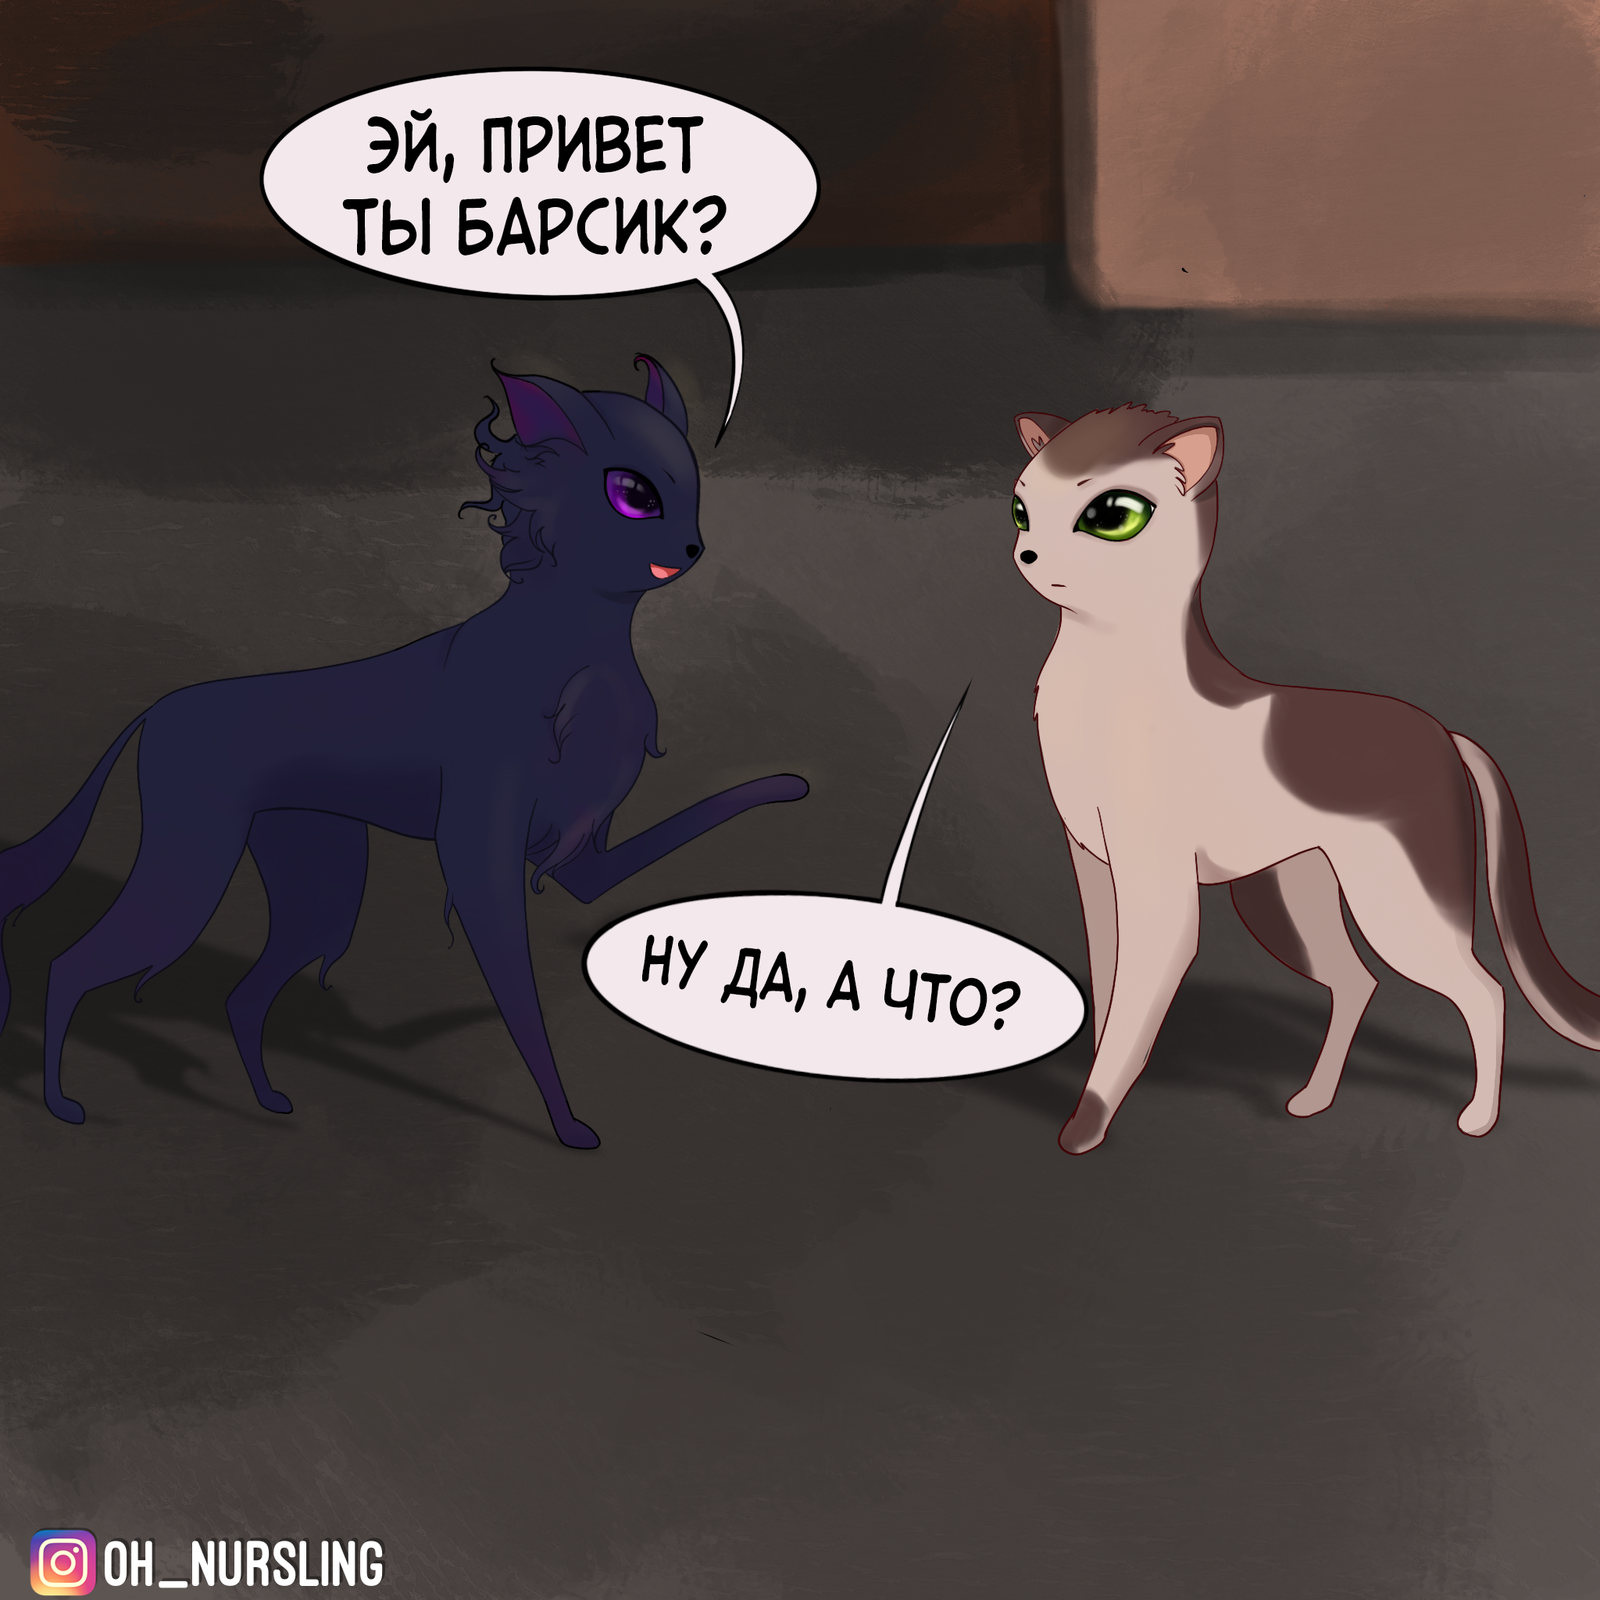 The tricks of the devil - My, GIF with background, Animals, cat, Dog, Humor, Comics, Pets, GIF, Video, Longpost